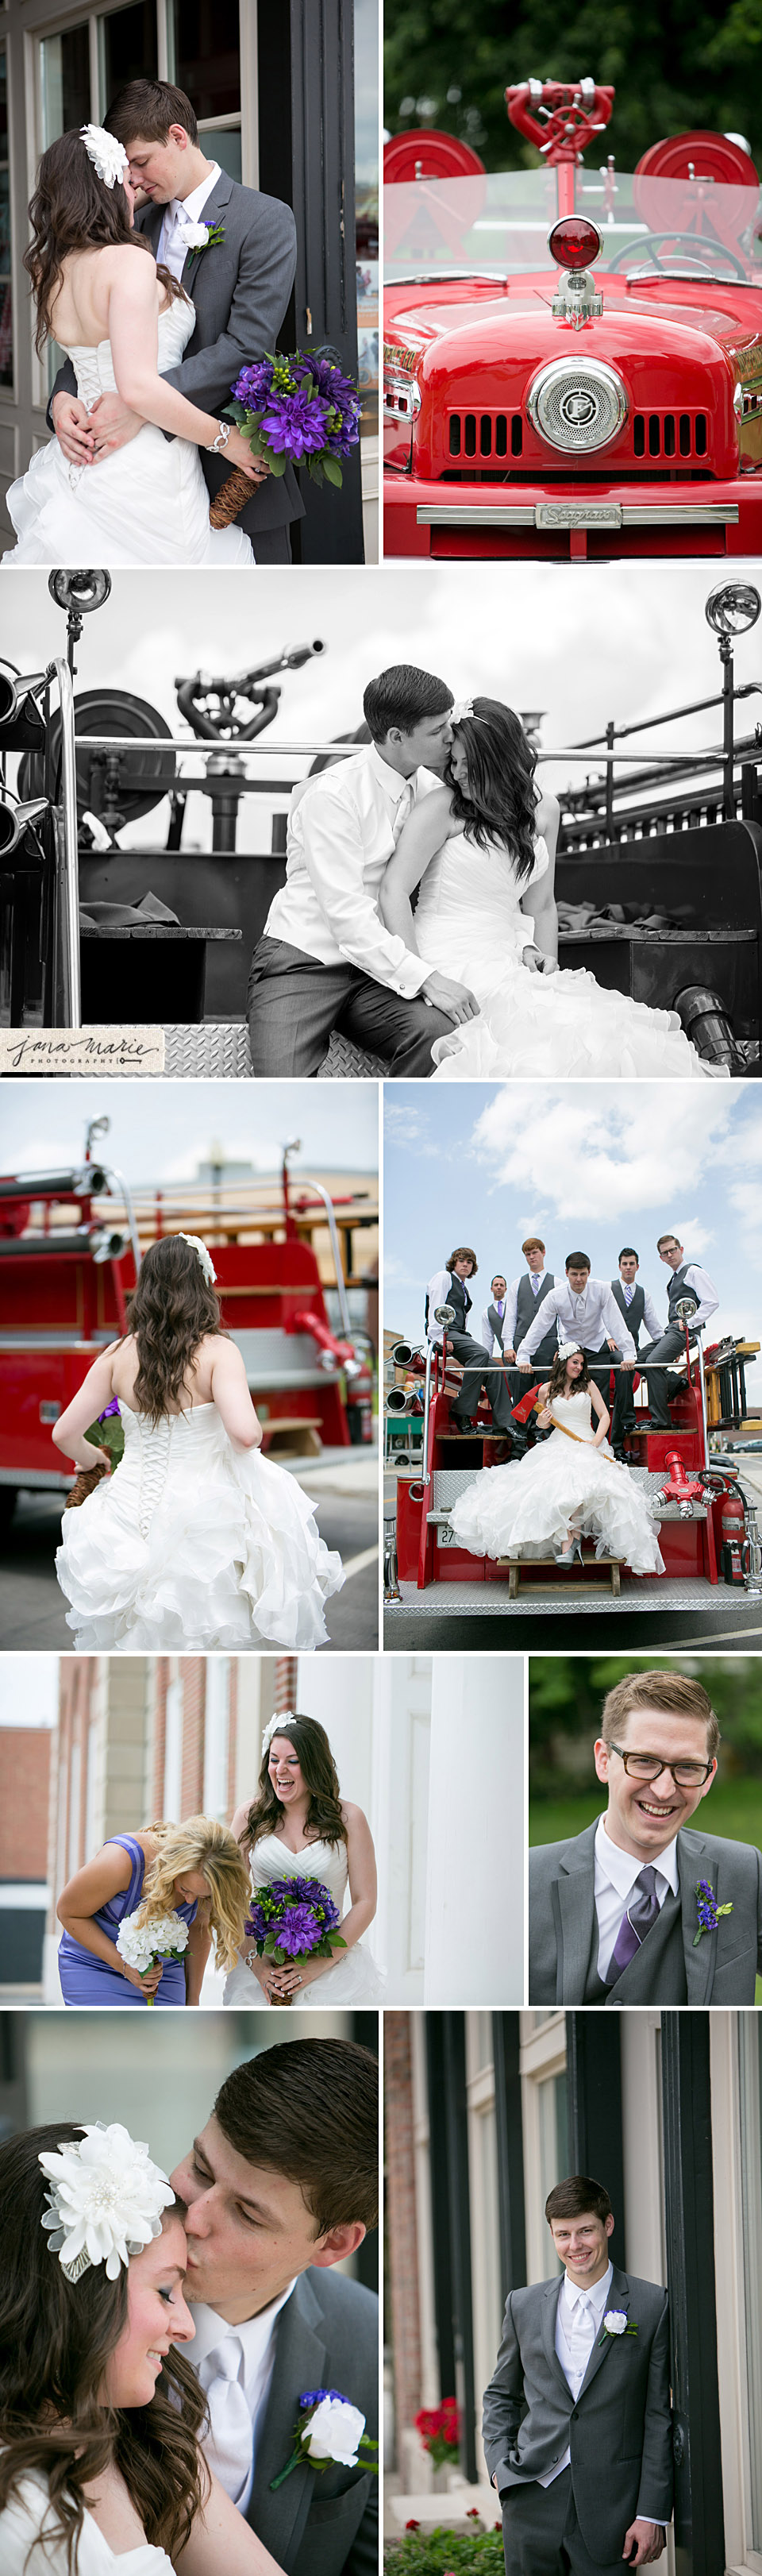 Independence fire department, KC wedding photographers, Jana Marie Photos, Beloved portraits, Bridal party